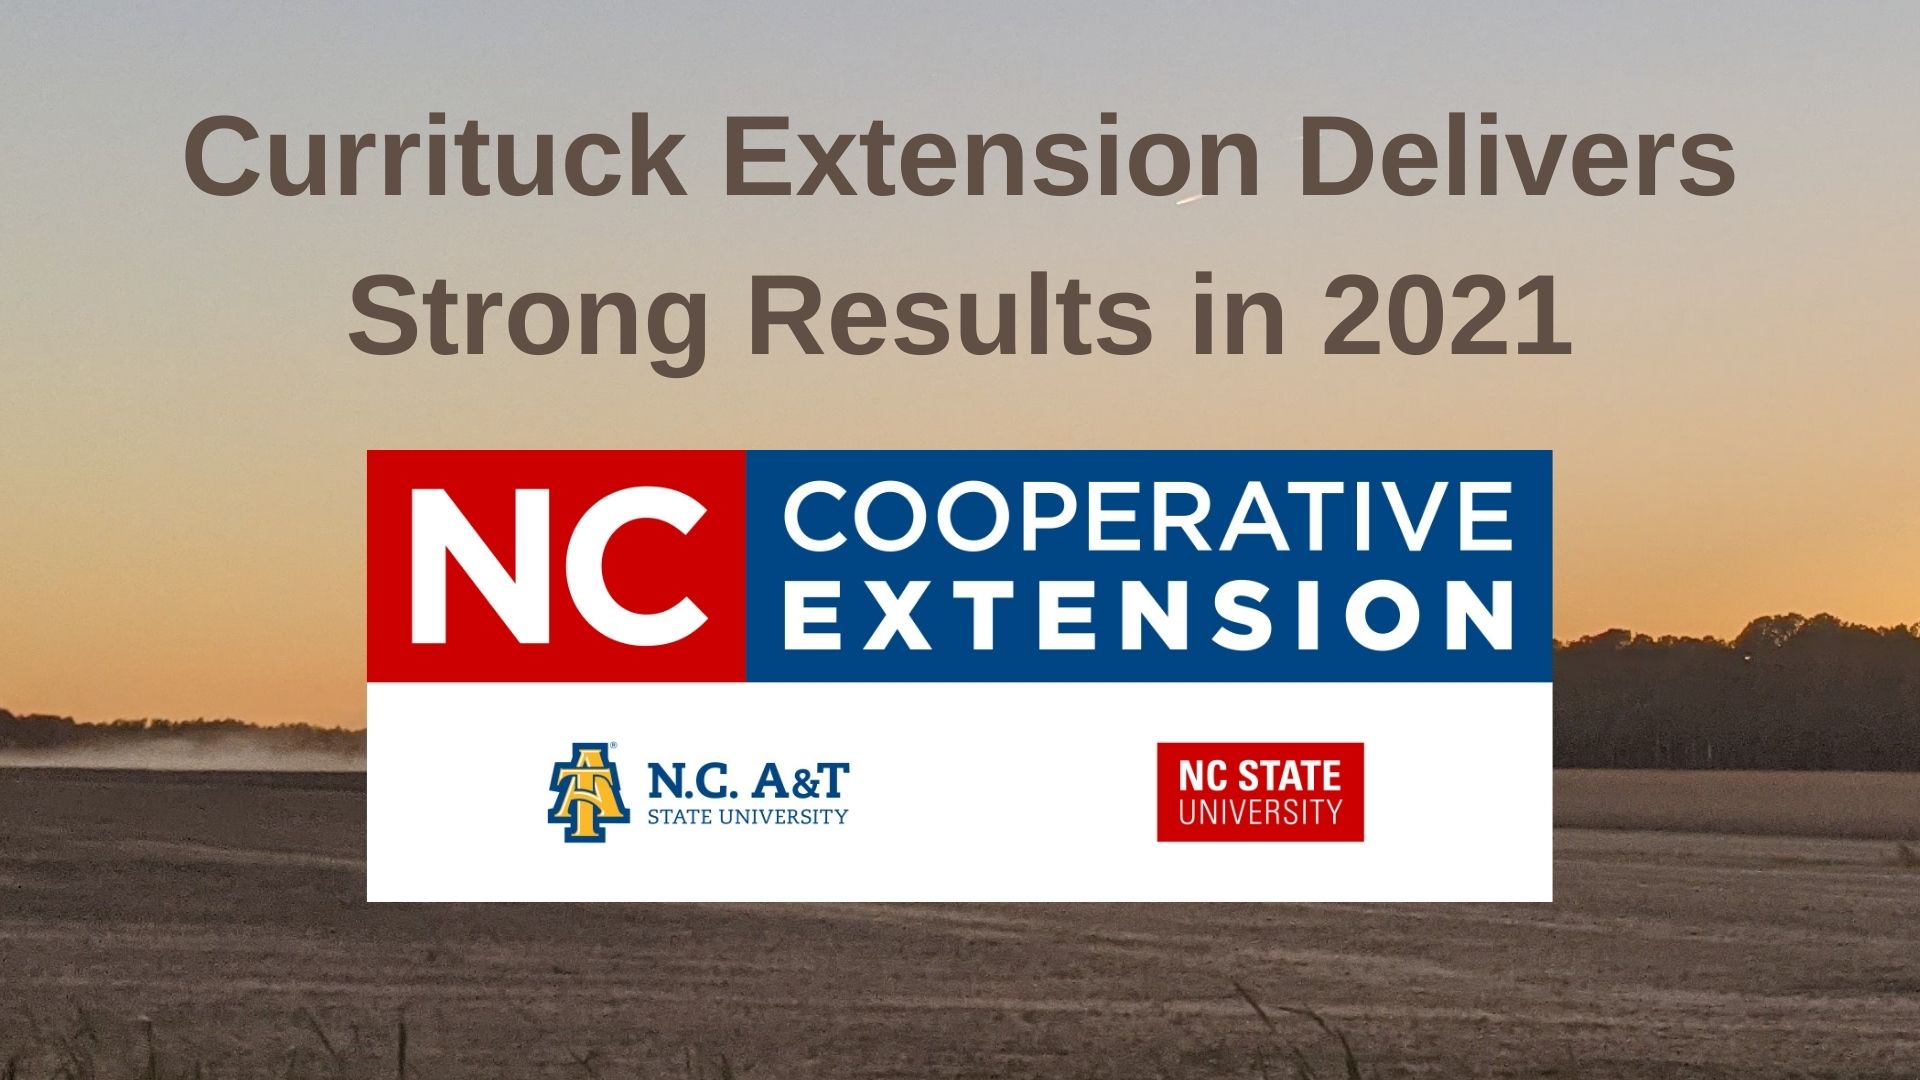 N.C. Cooperative Extension logo with words "Currituck Extension Delivers Strong Results in 2021"